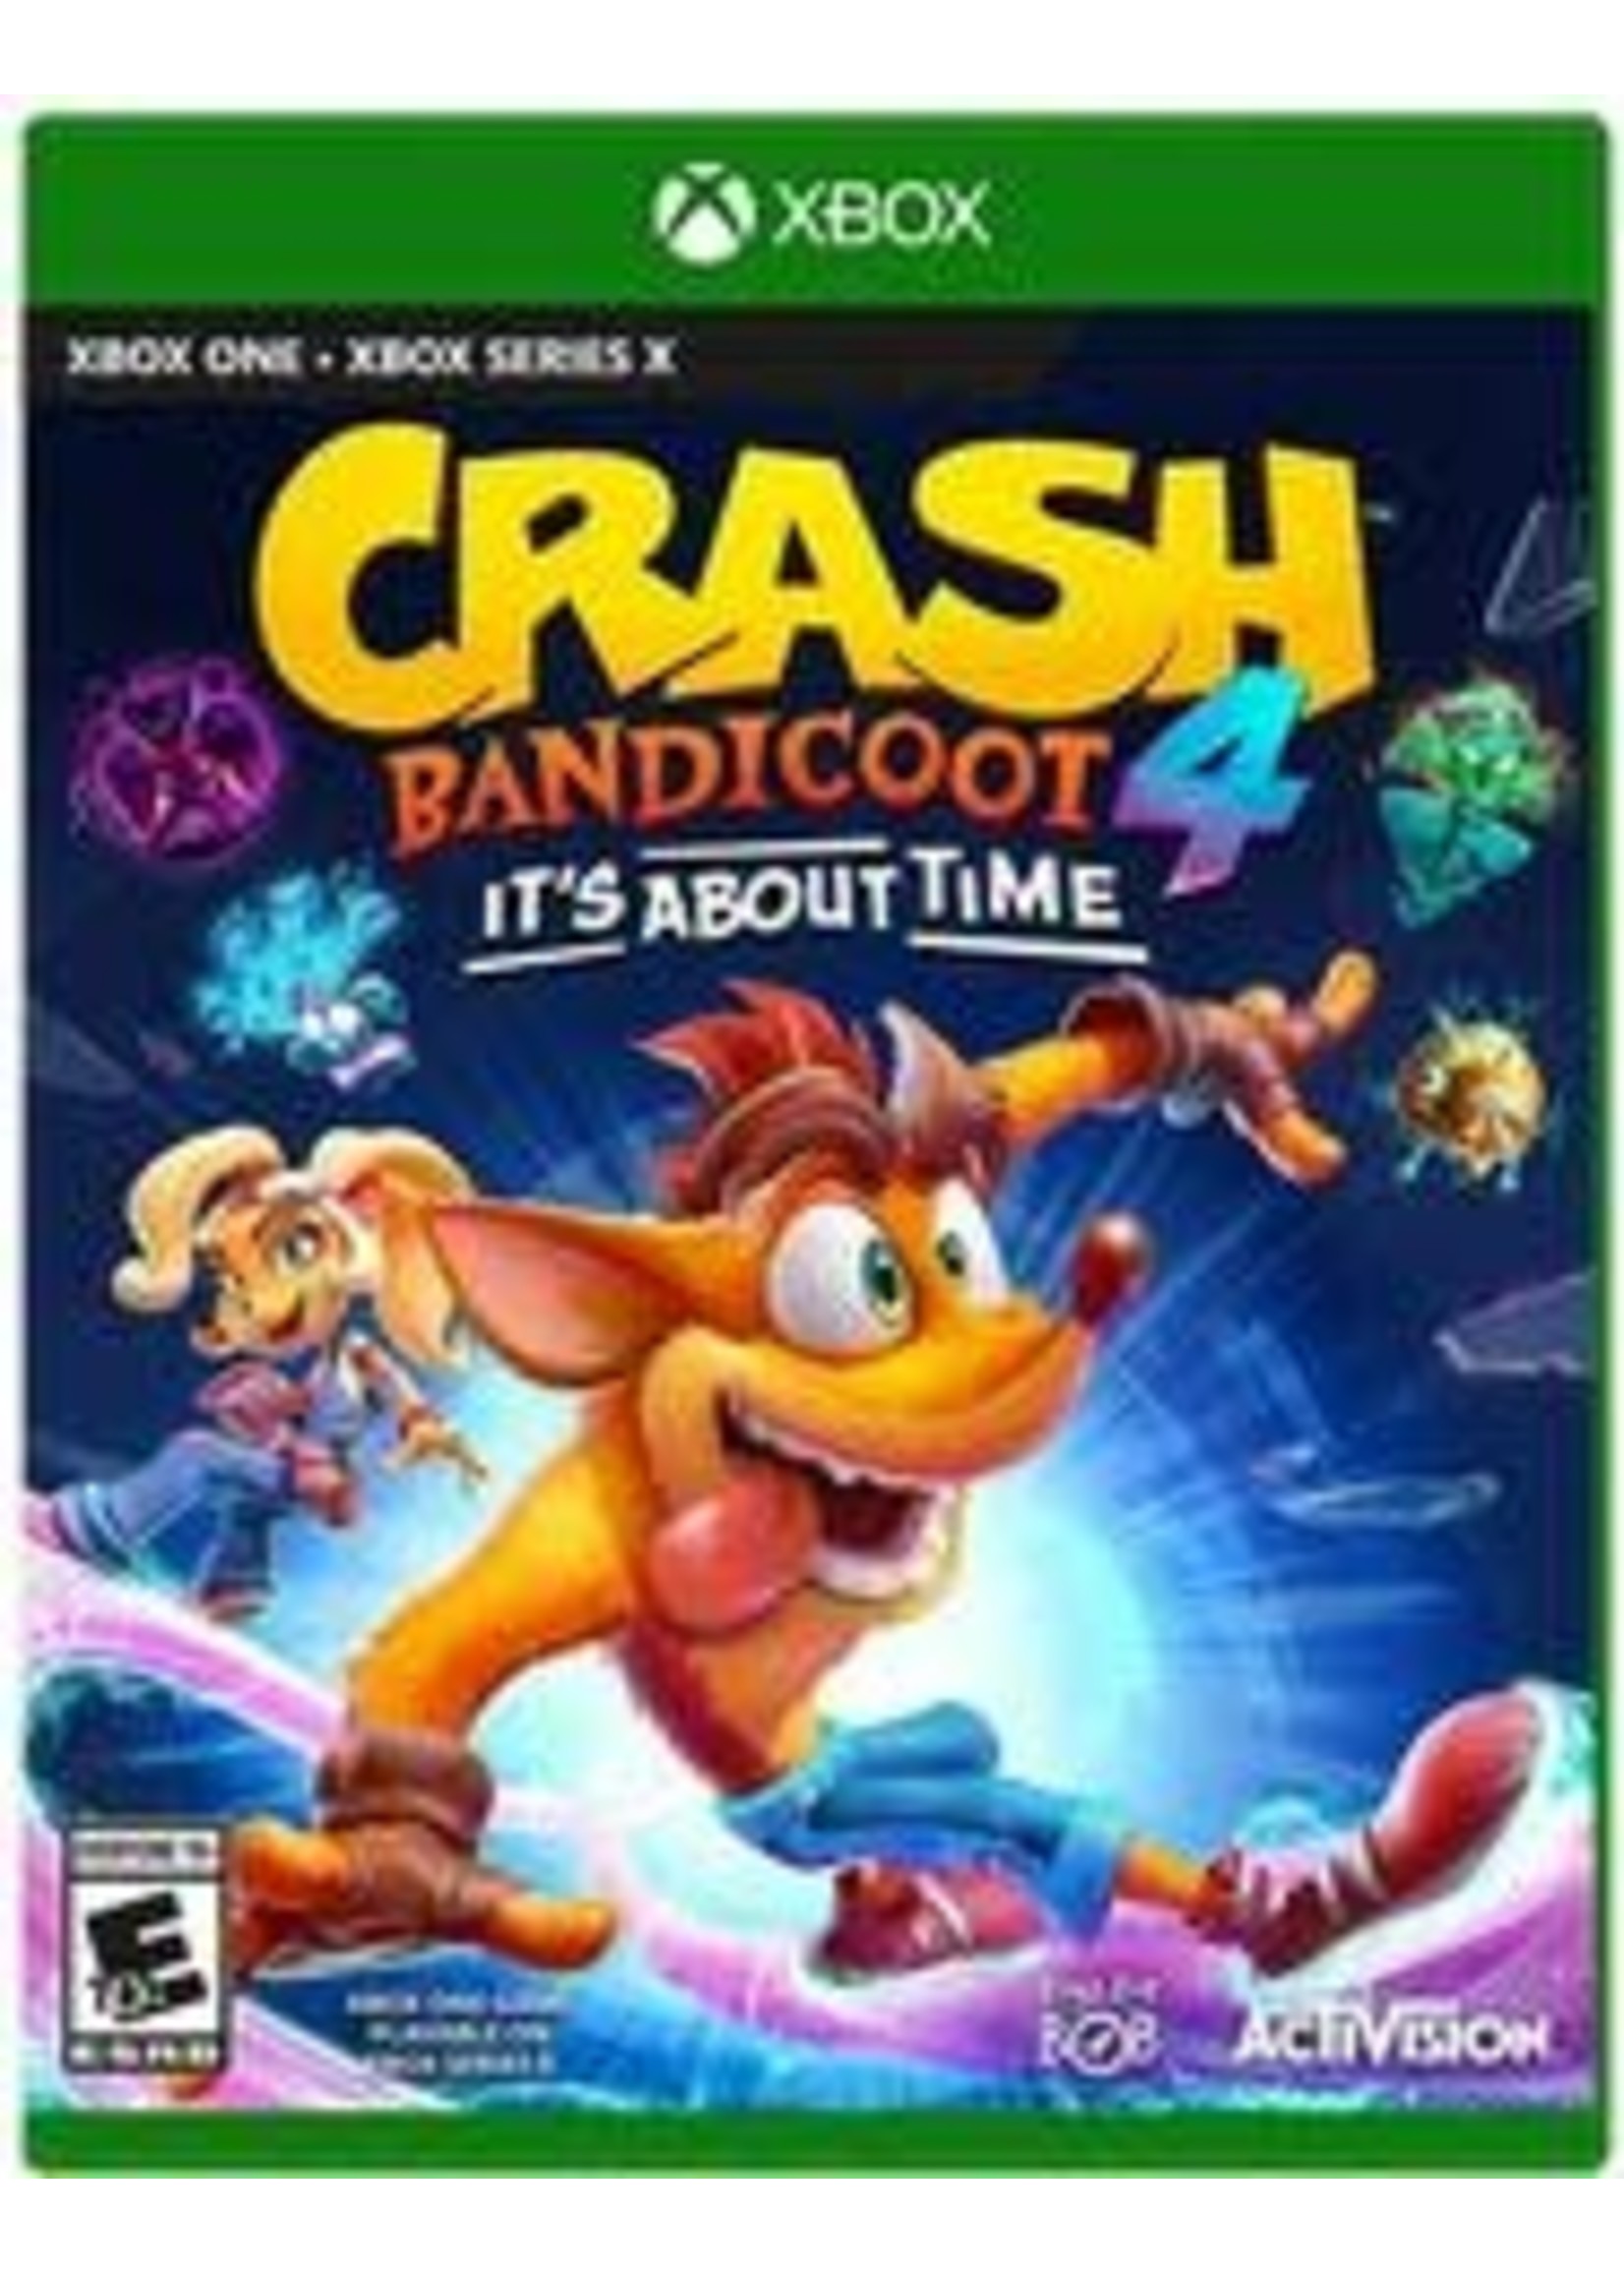 Crash Bandicoot 4: It's About Time Xbox One